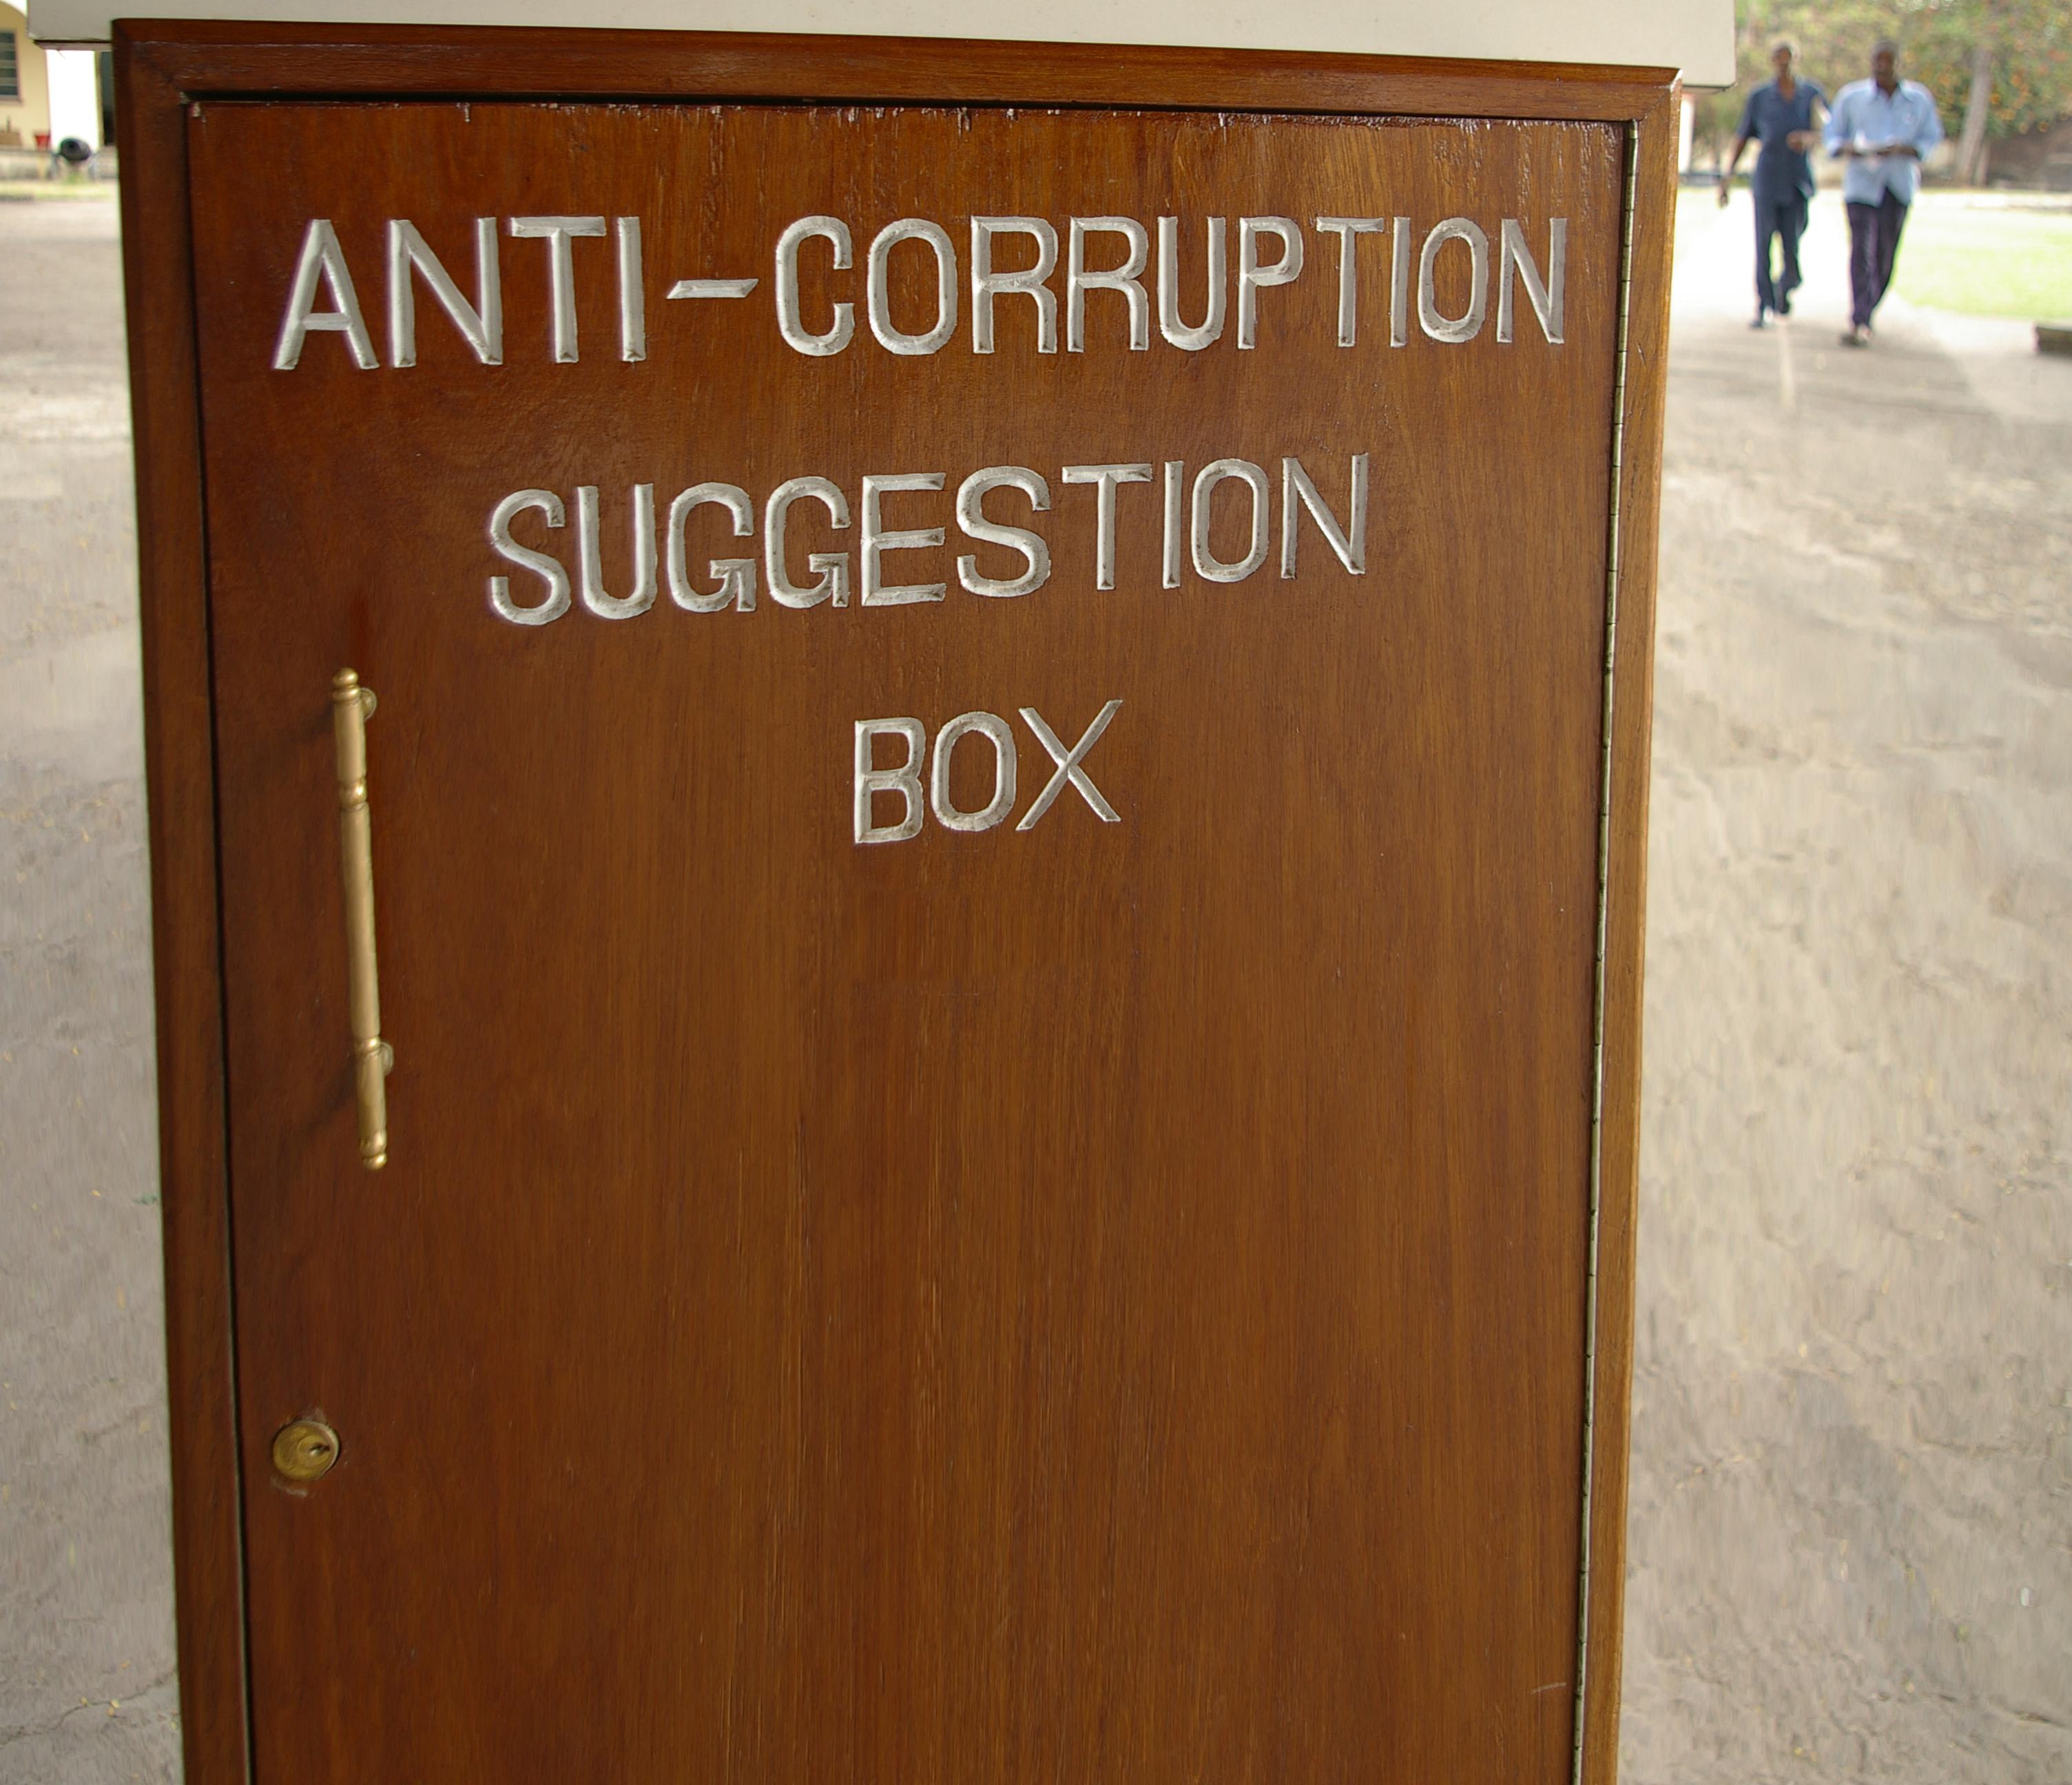 Understanding corruption and how to curb it